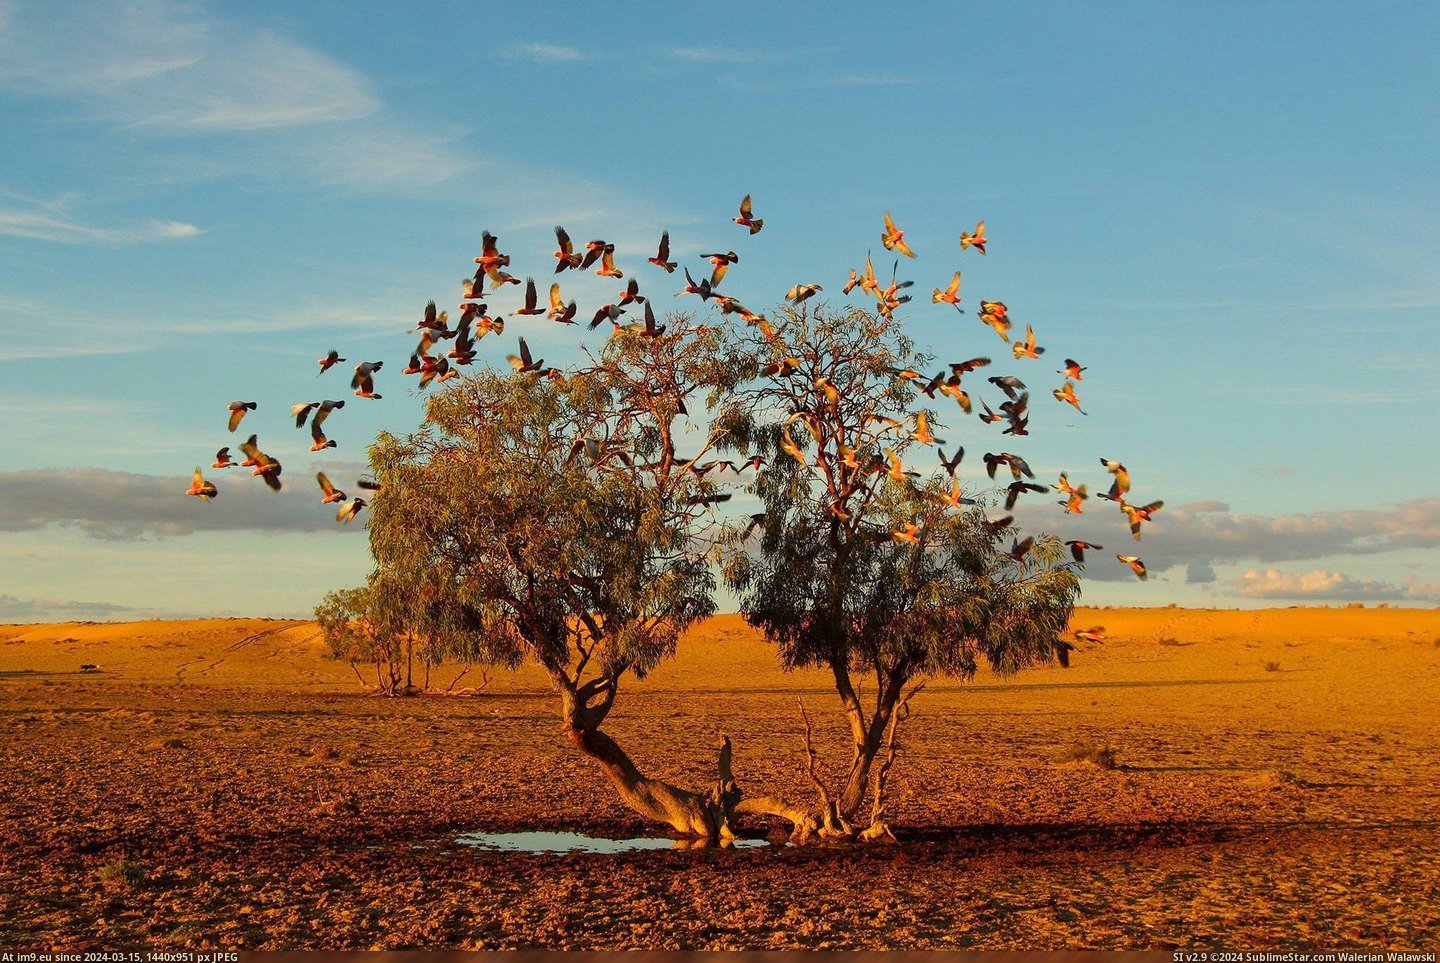 #Photo #Tree #Australia #Dreaming #Spencer #Desert #2048x1365 #Christian [Earthporn] 'The Dreaming Tree' - Strzelecki Desert, Australia [2048x1365] Photo by Christian Spencer Pic. (Image of album My r/EARTHPORN favs))